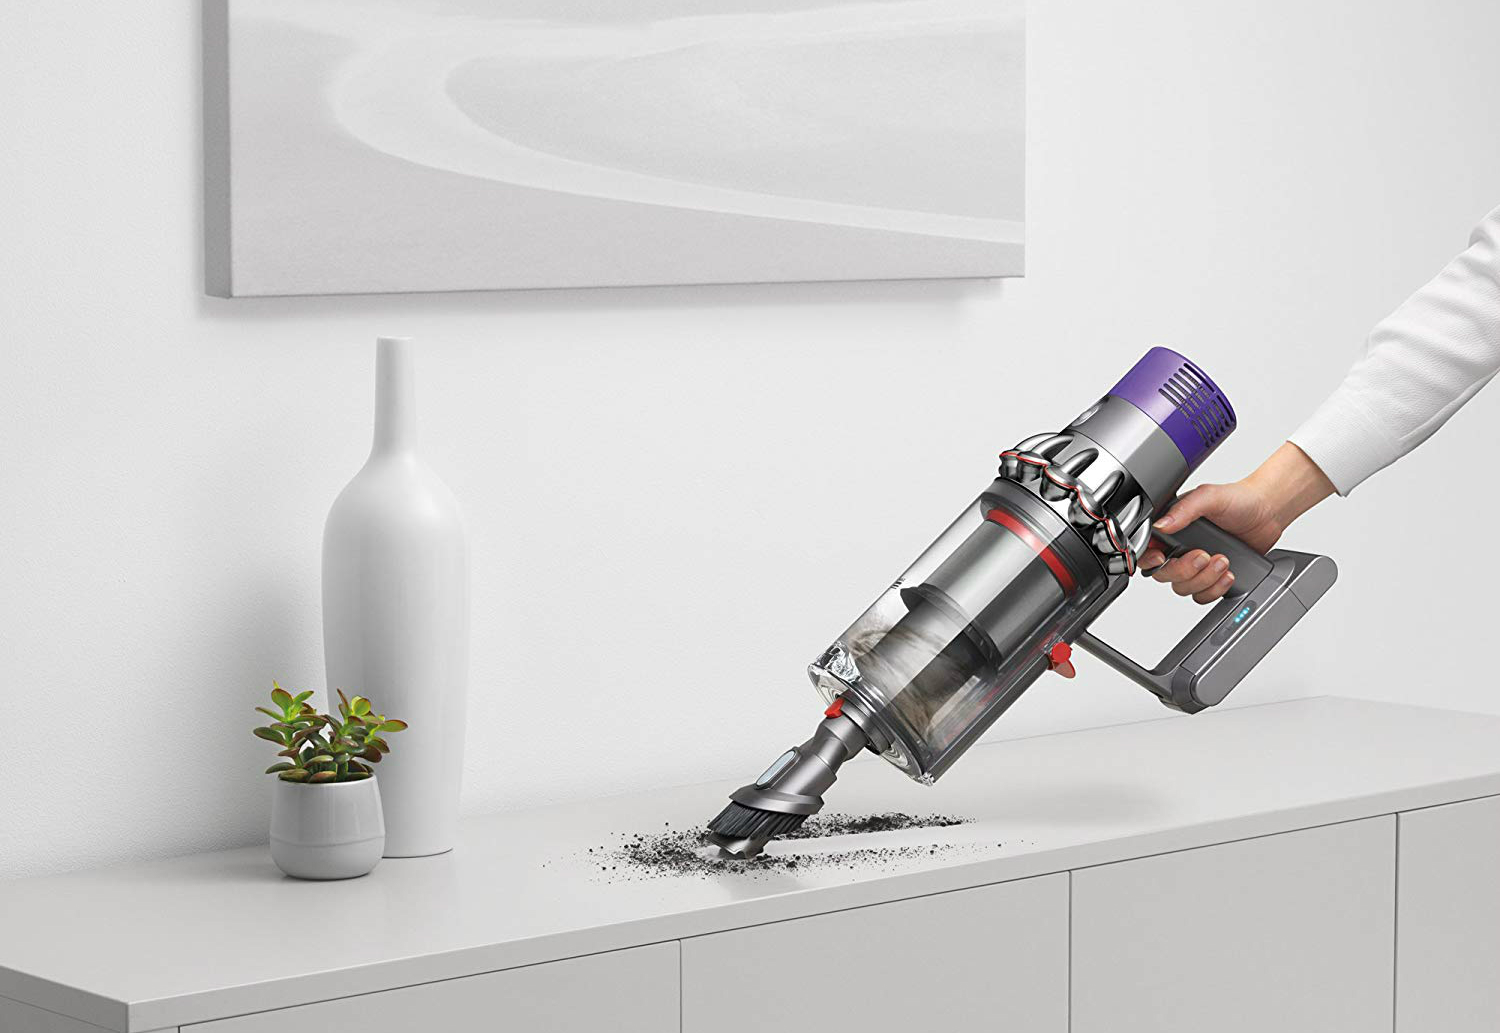 dyson vacuum cleaner deals on amazon cyclone v10 absolute lightweight cordless stick 4